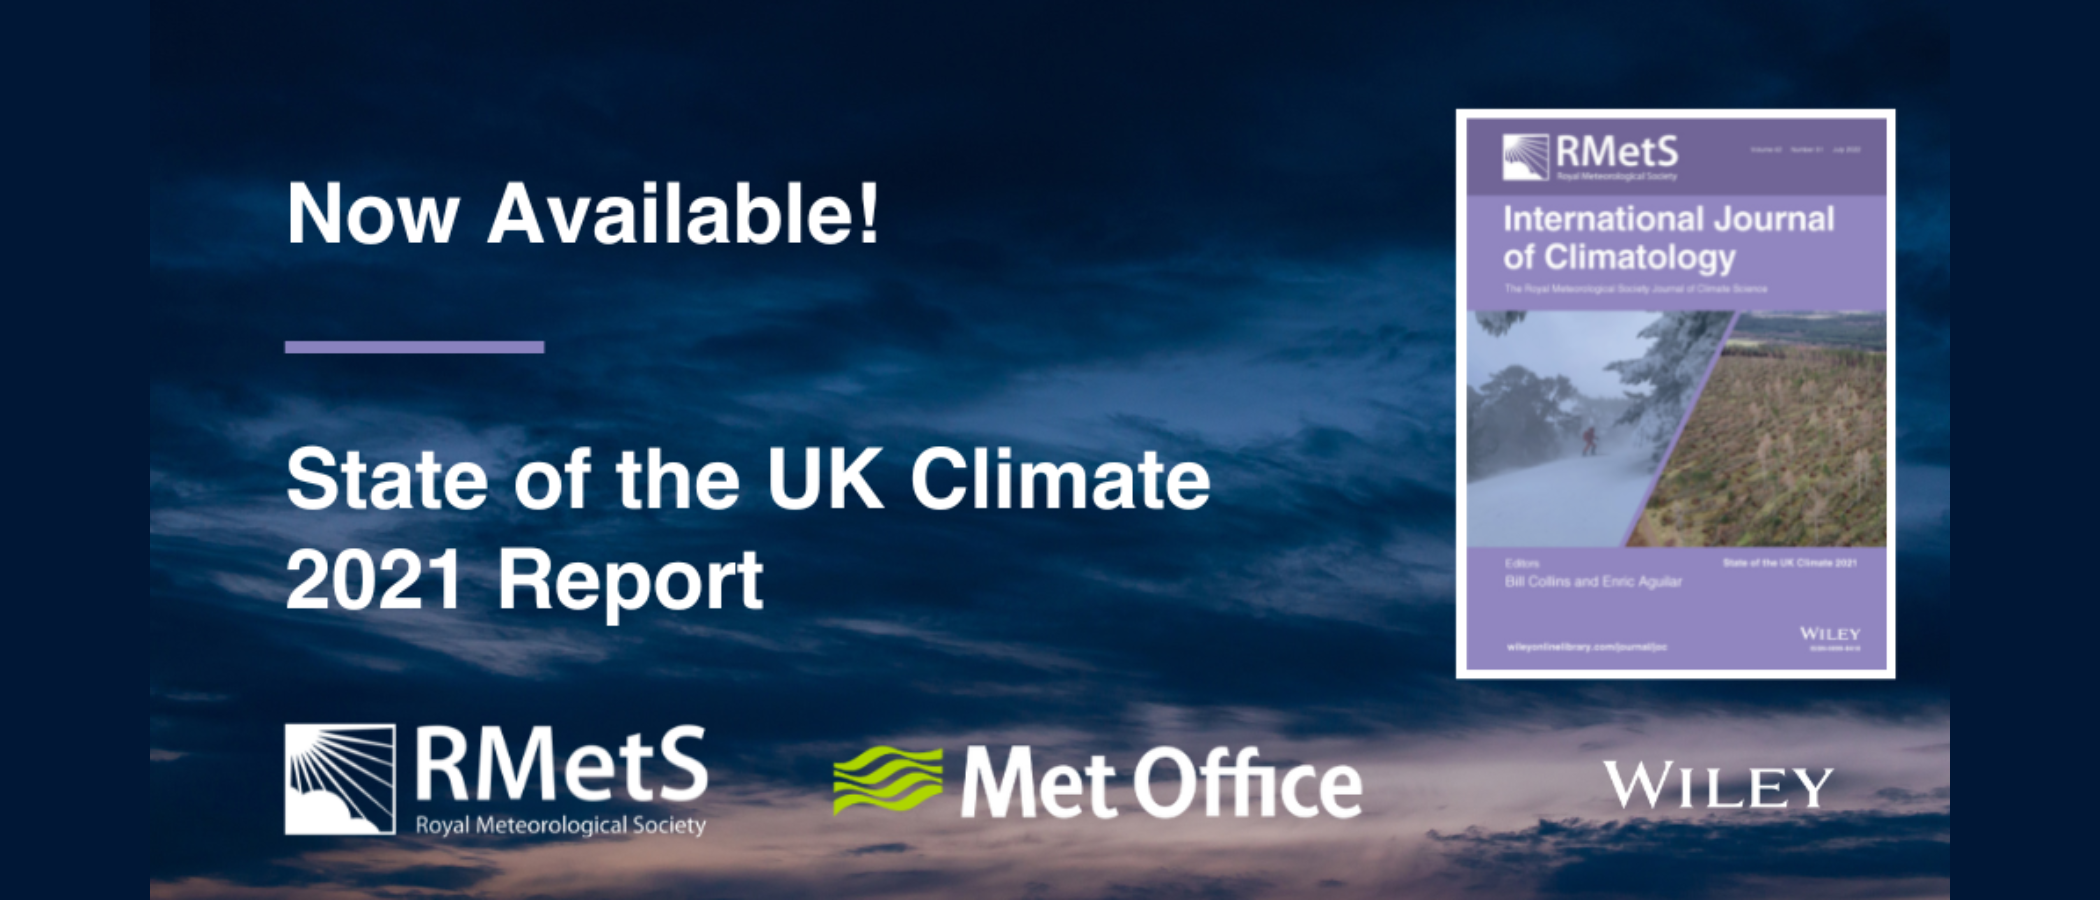 front cover of report with RMetS, Met Office and Wiley logos